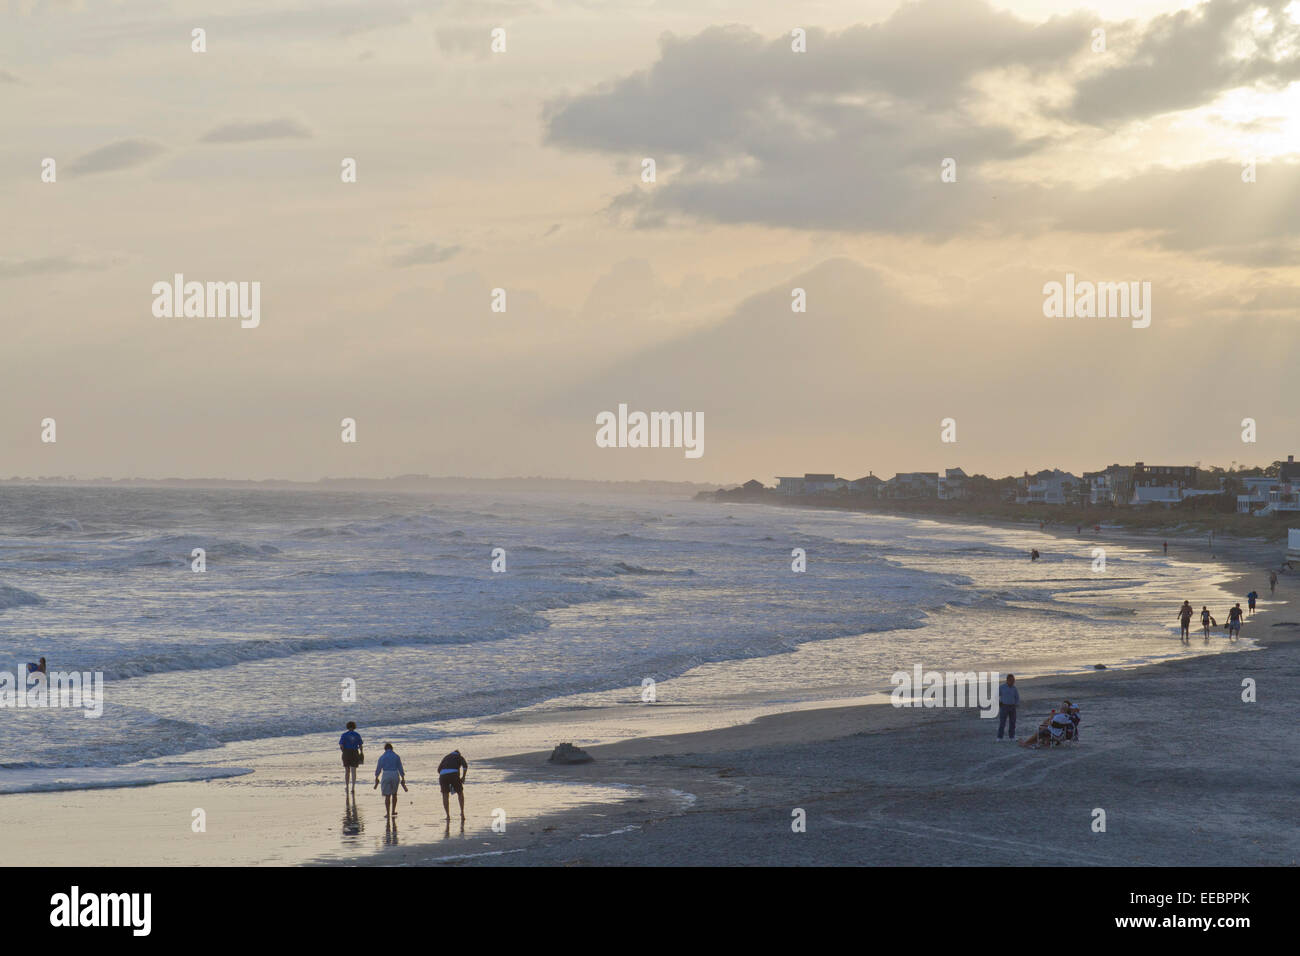 Relaxed people wander the beach and play in the ocean at twilight Stock Photo